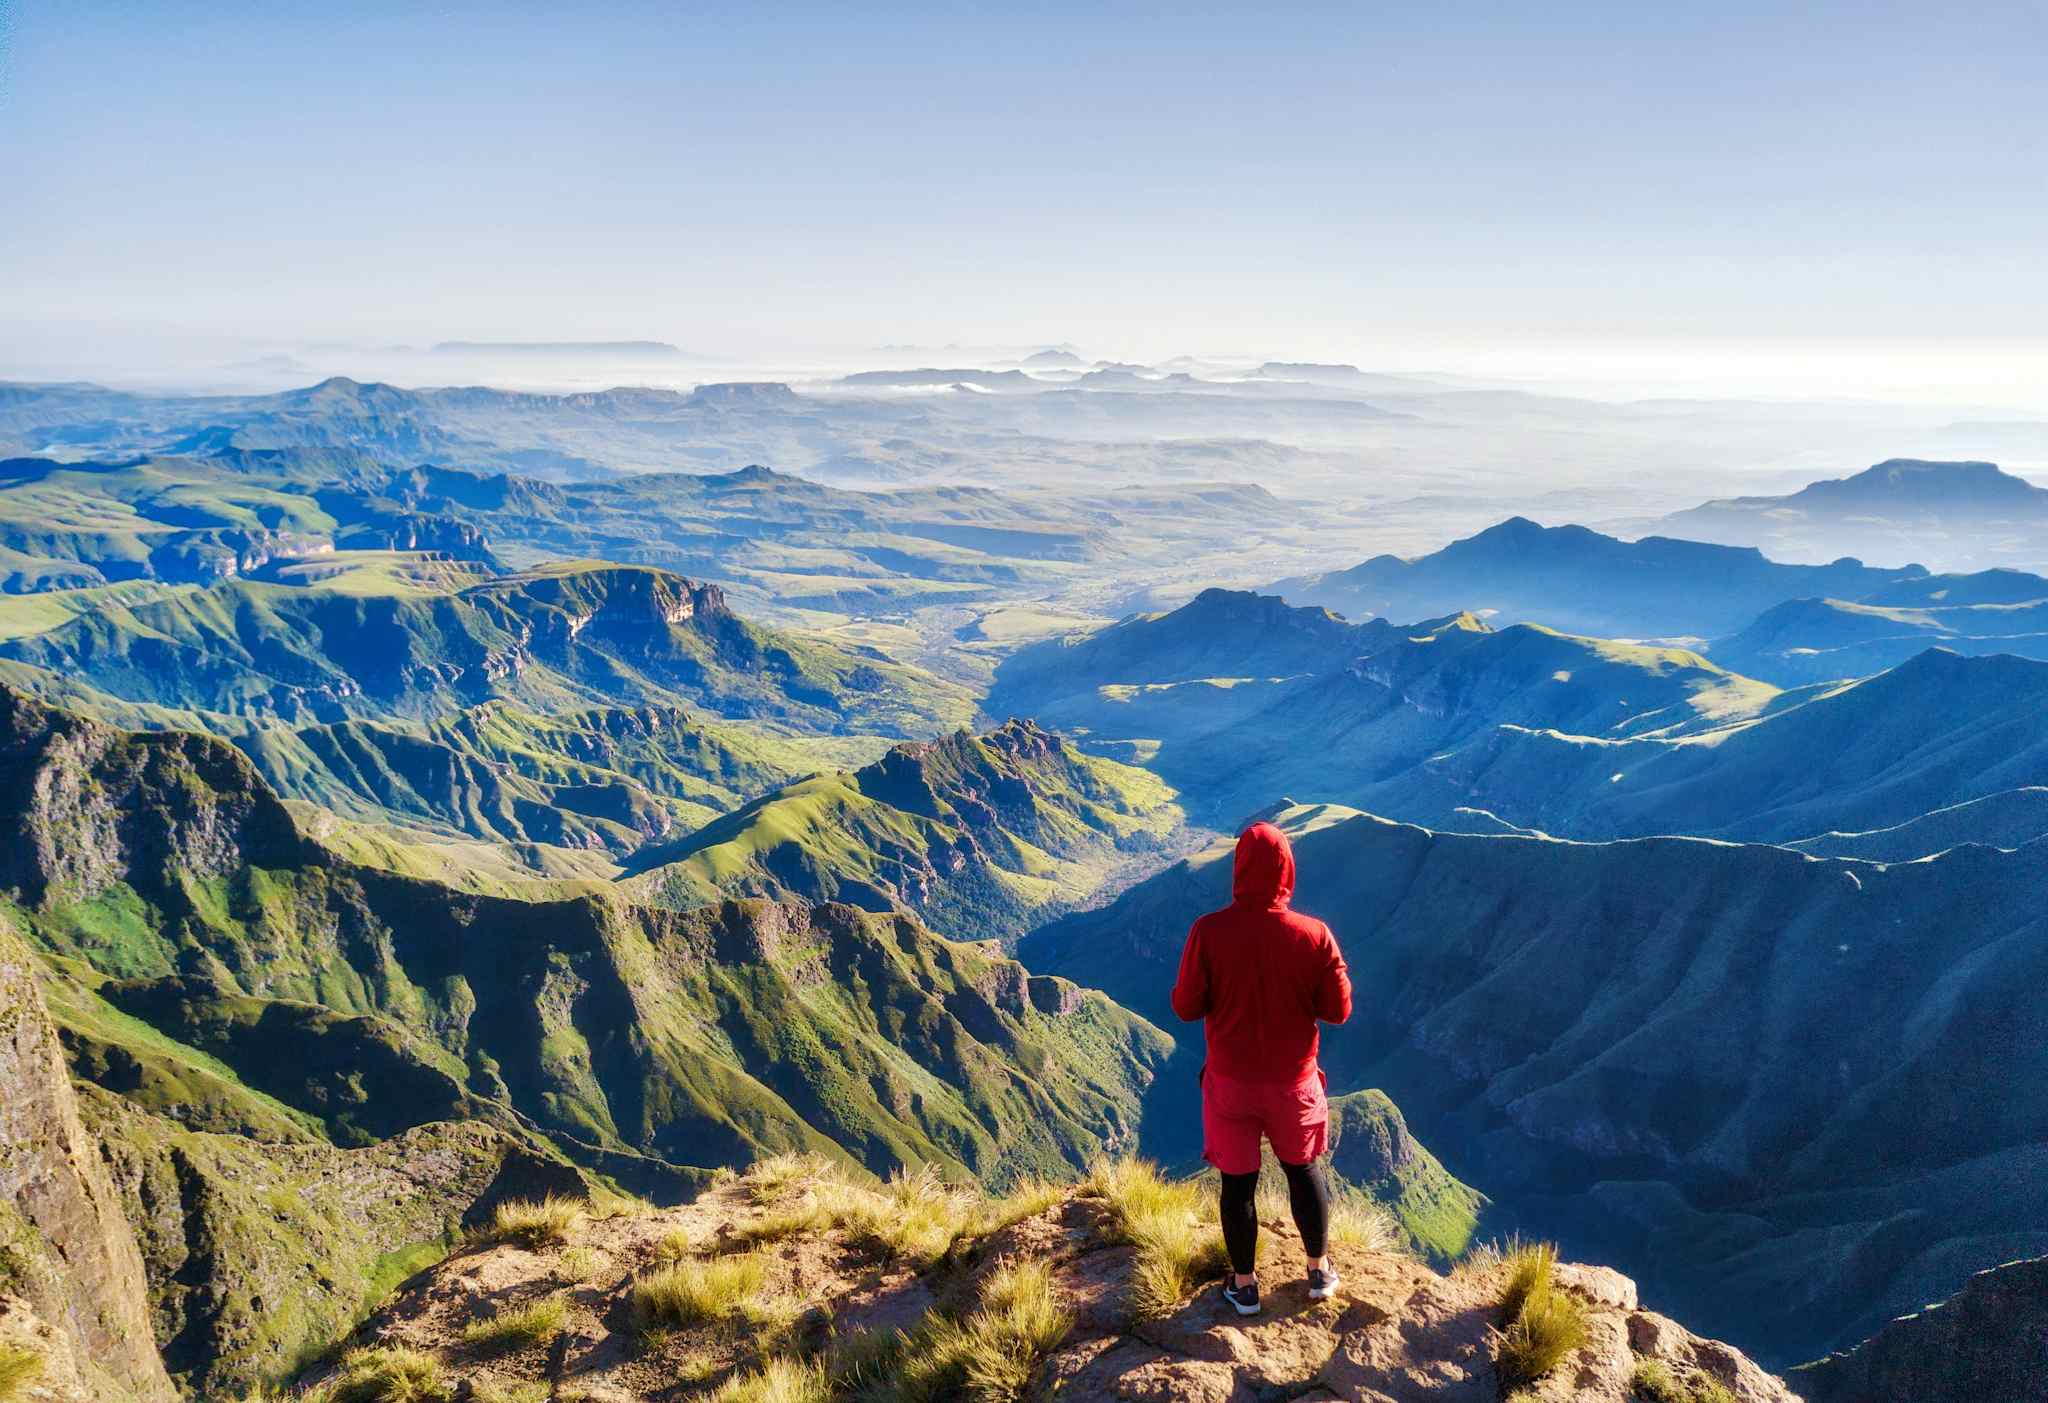 Hiker overlooking Drakensberg mountains from Amphitheatre, South Africa. Photo: GettyImages-1140319738